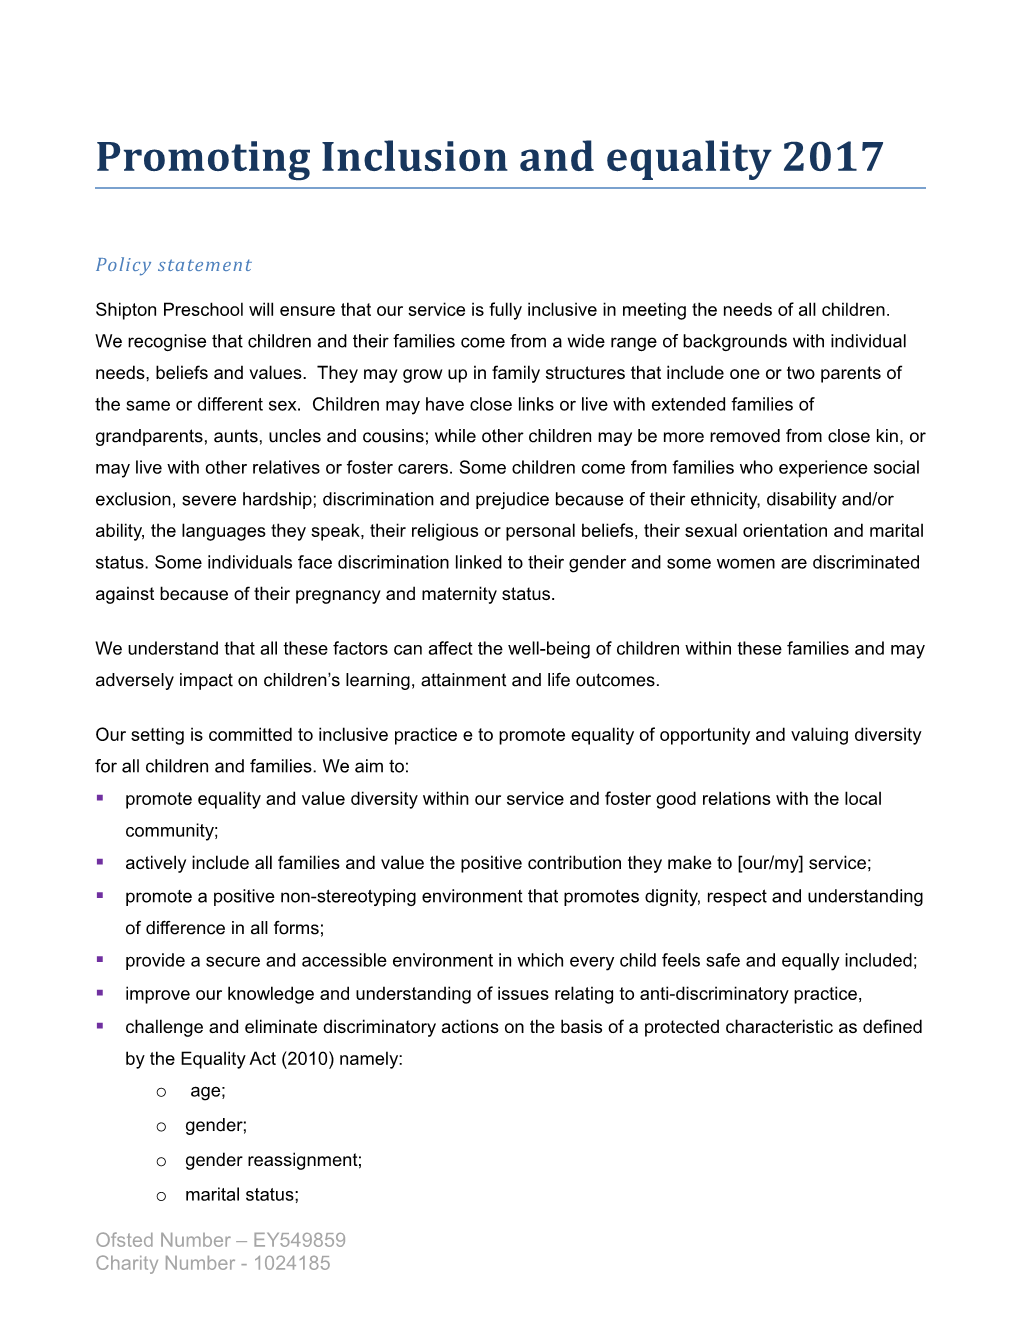 Promoting Inclusion and Equality 2017